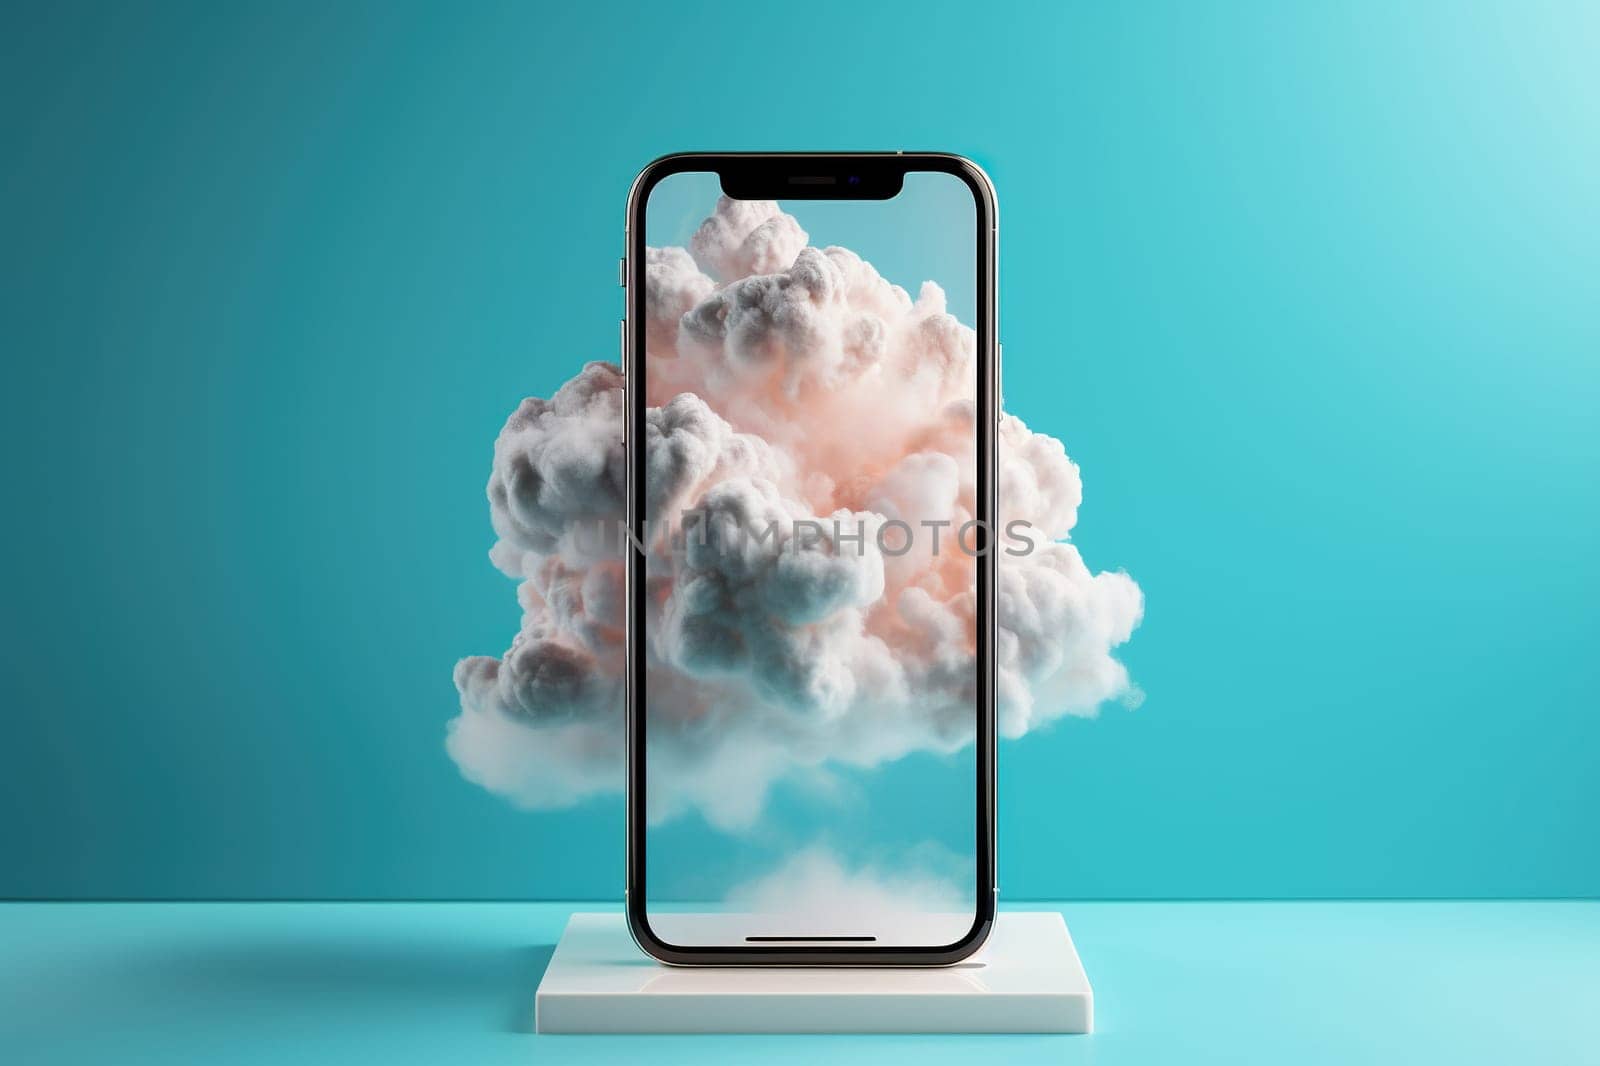 Realistic image of clouds on a smartphone screen. The concept of high-quality photographs on a smartphone.